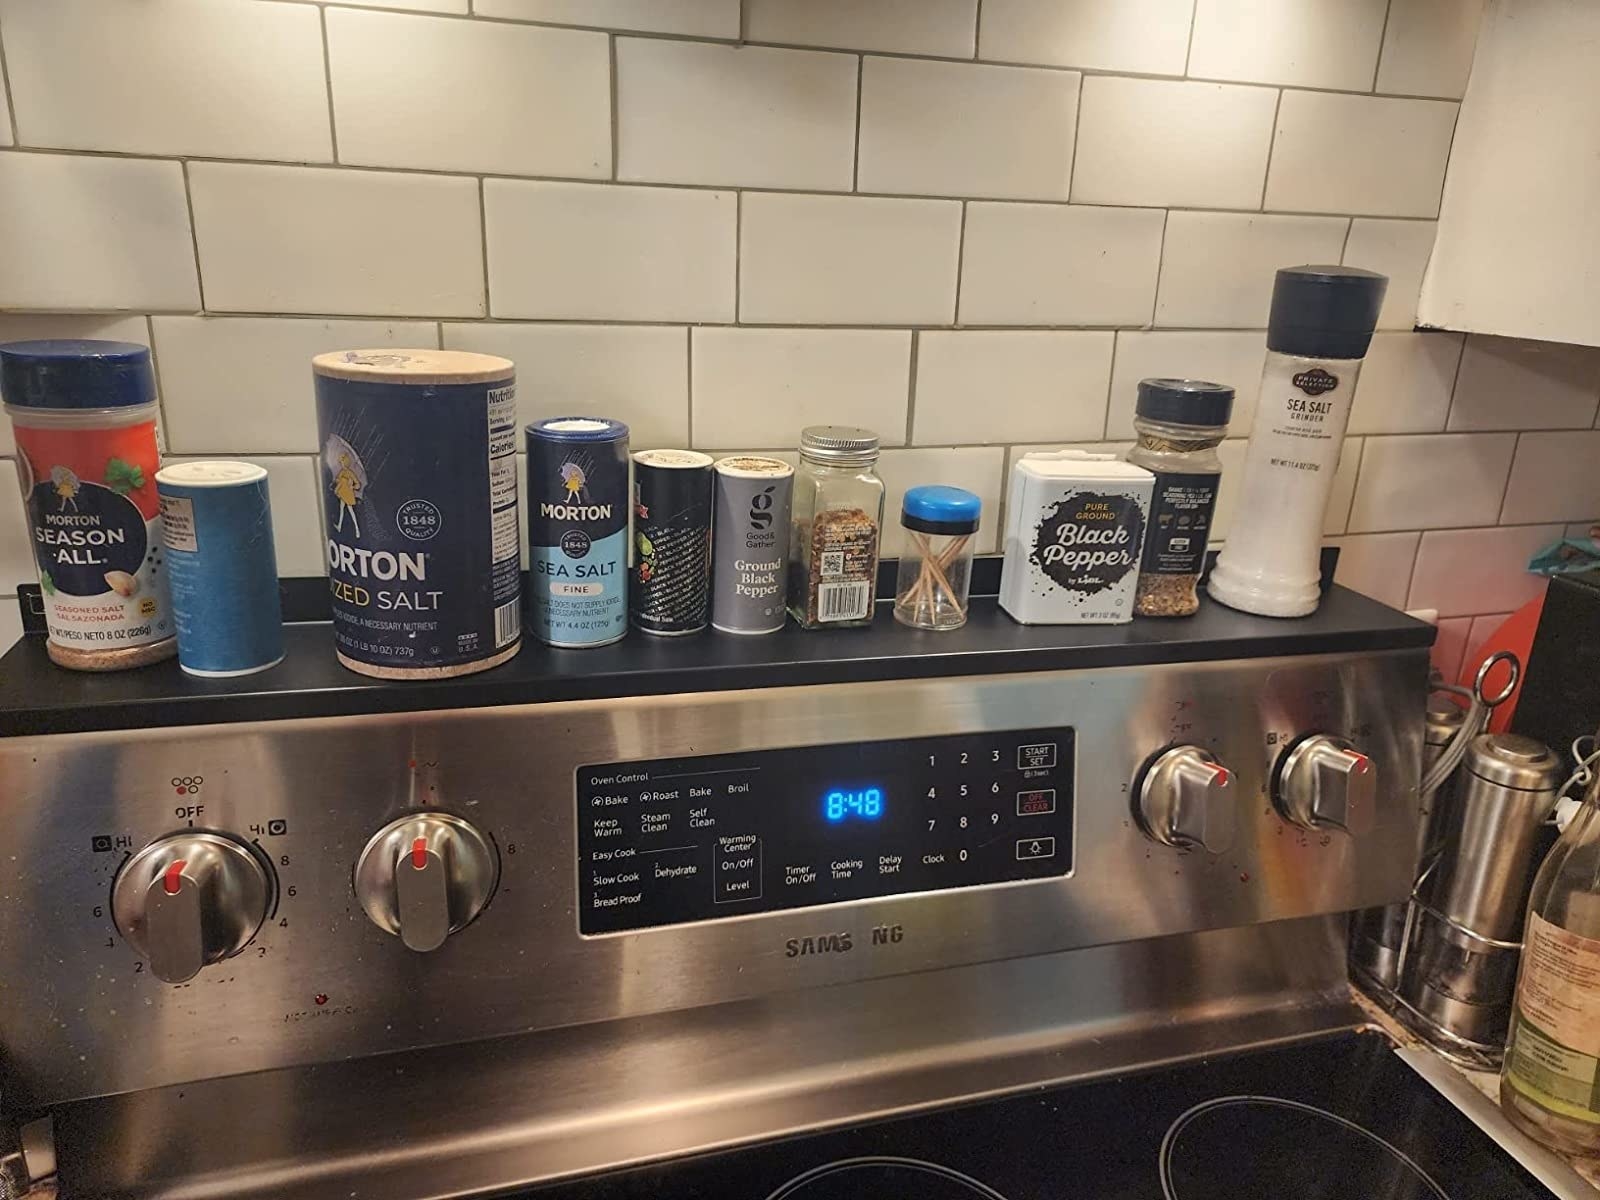 Reviewer image of the shelf on their stove holding seasonings